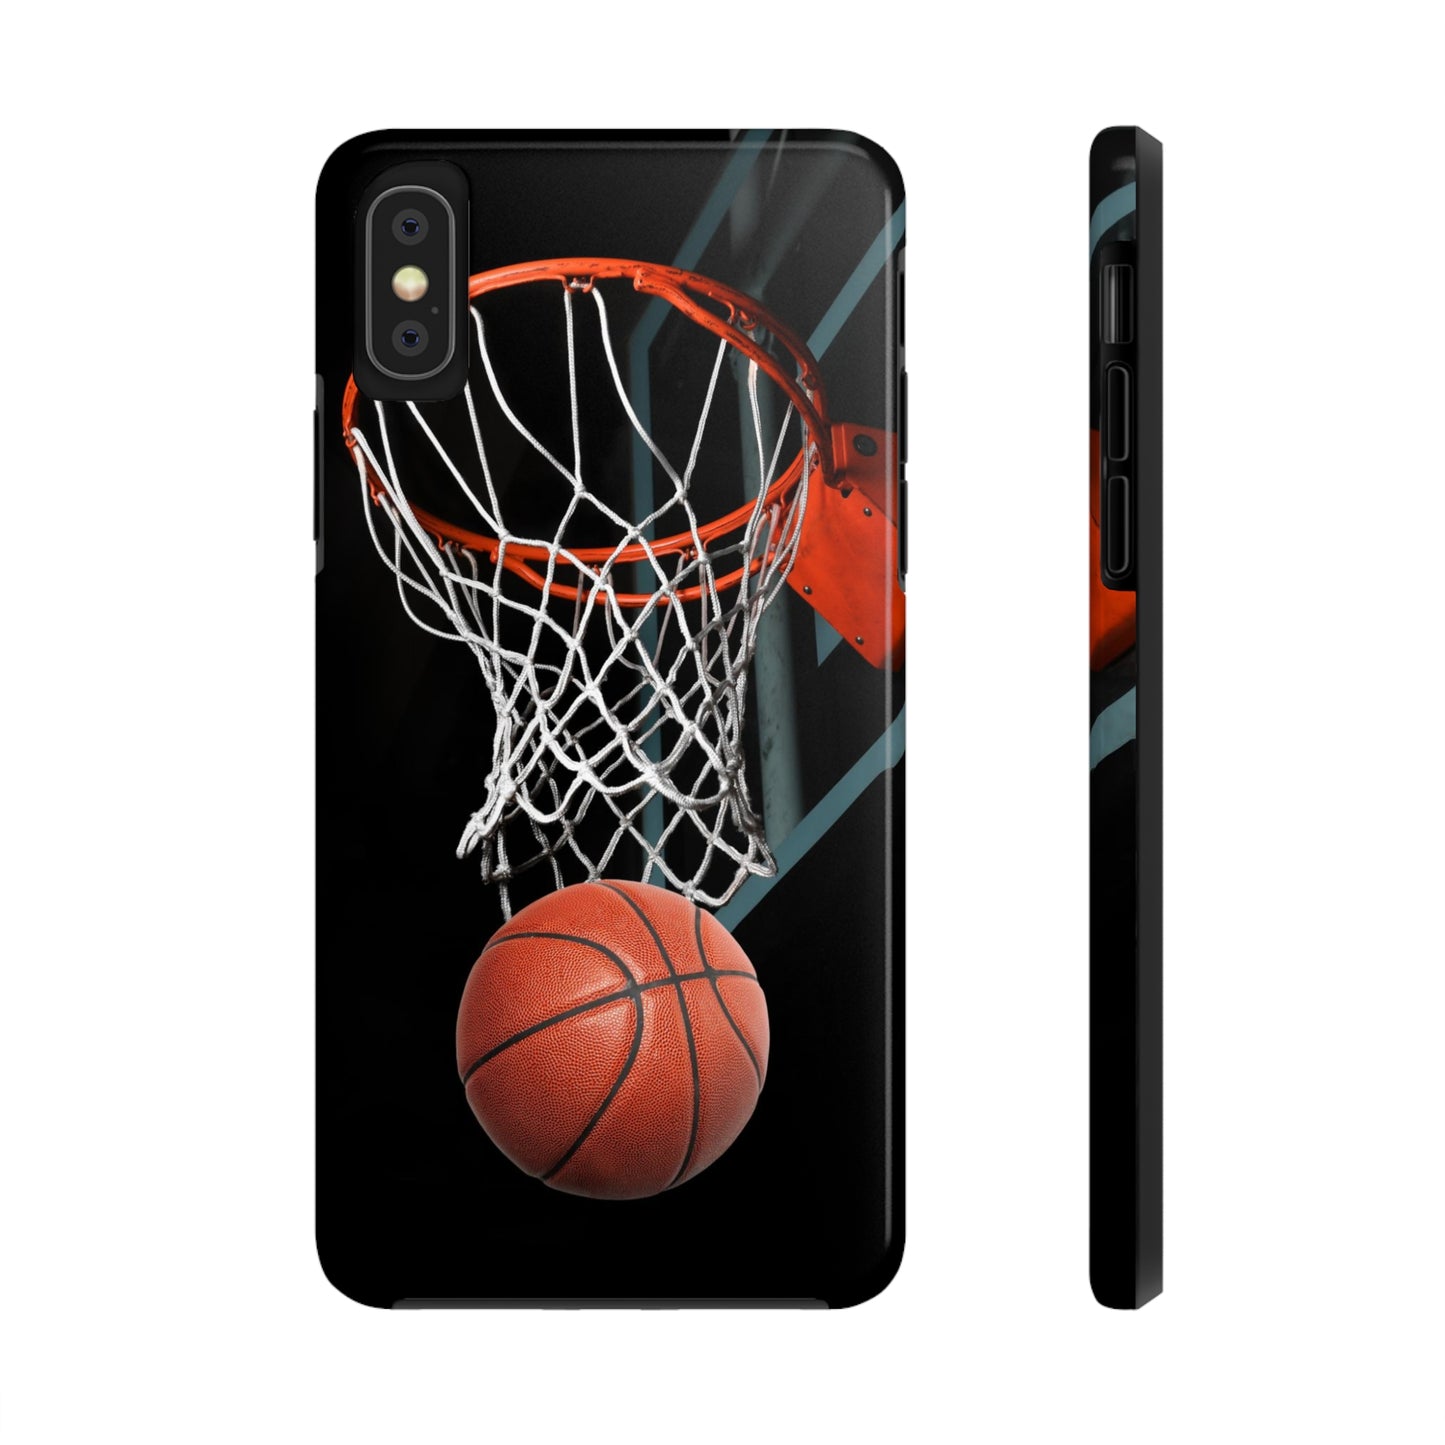 Basketball Only / iPhone Case